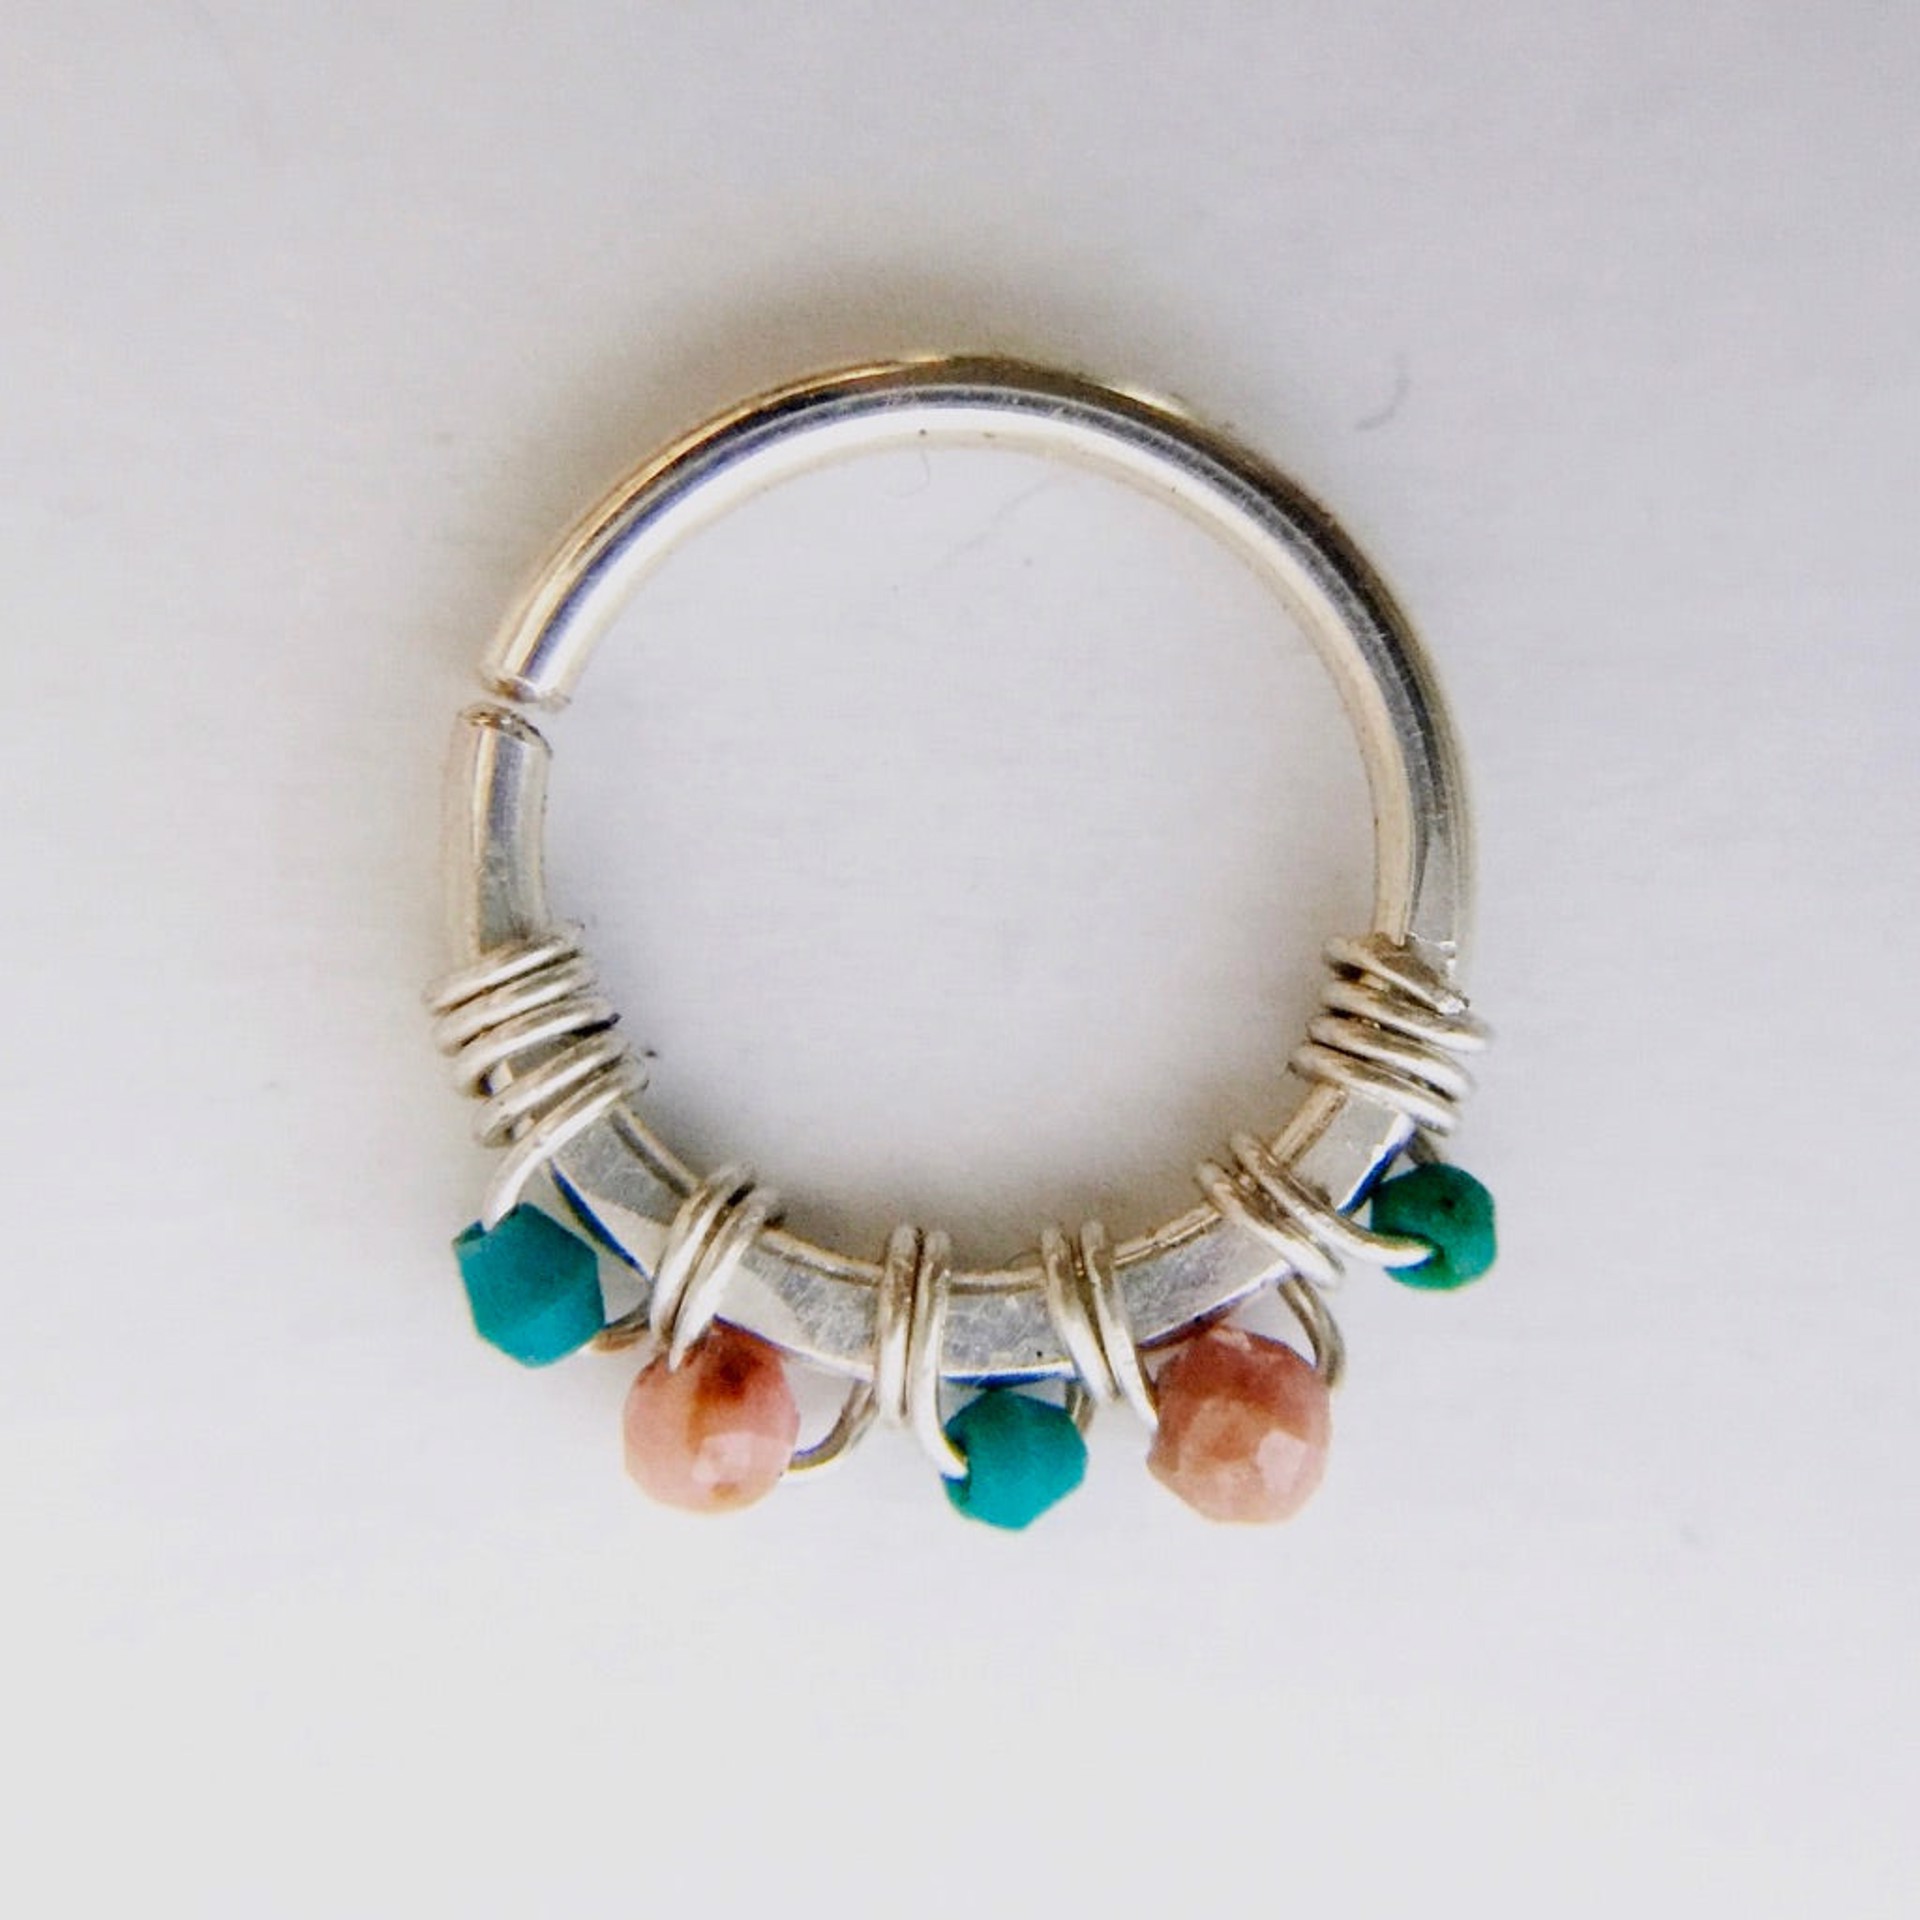 Jeweled Septum Ring in Silver - 8mm by Clementine & Co. Jewelry